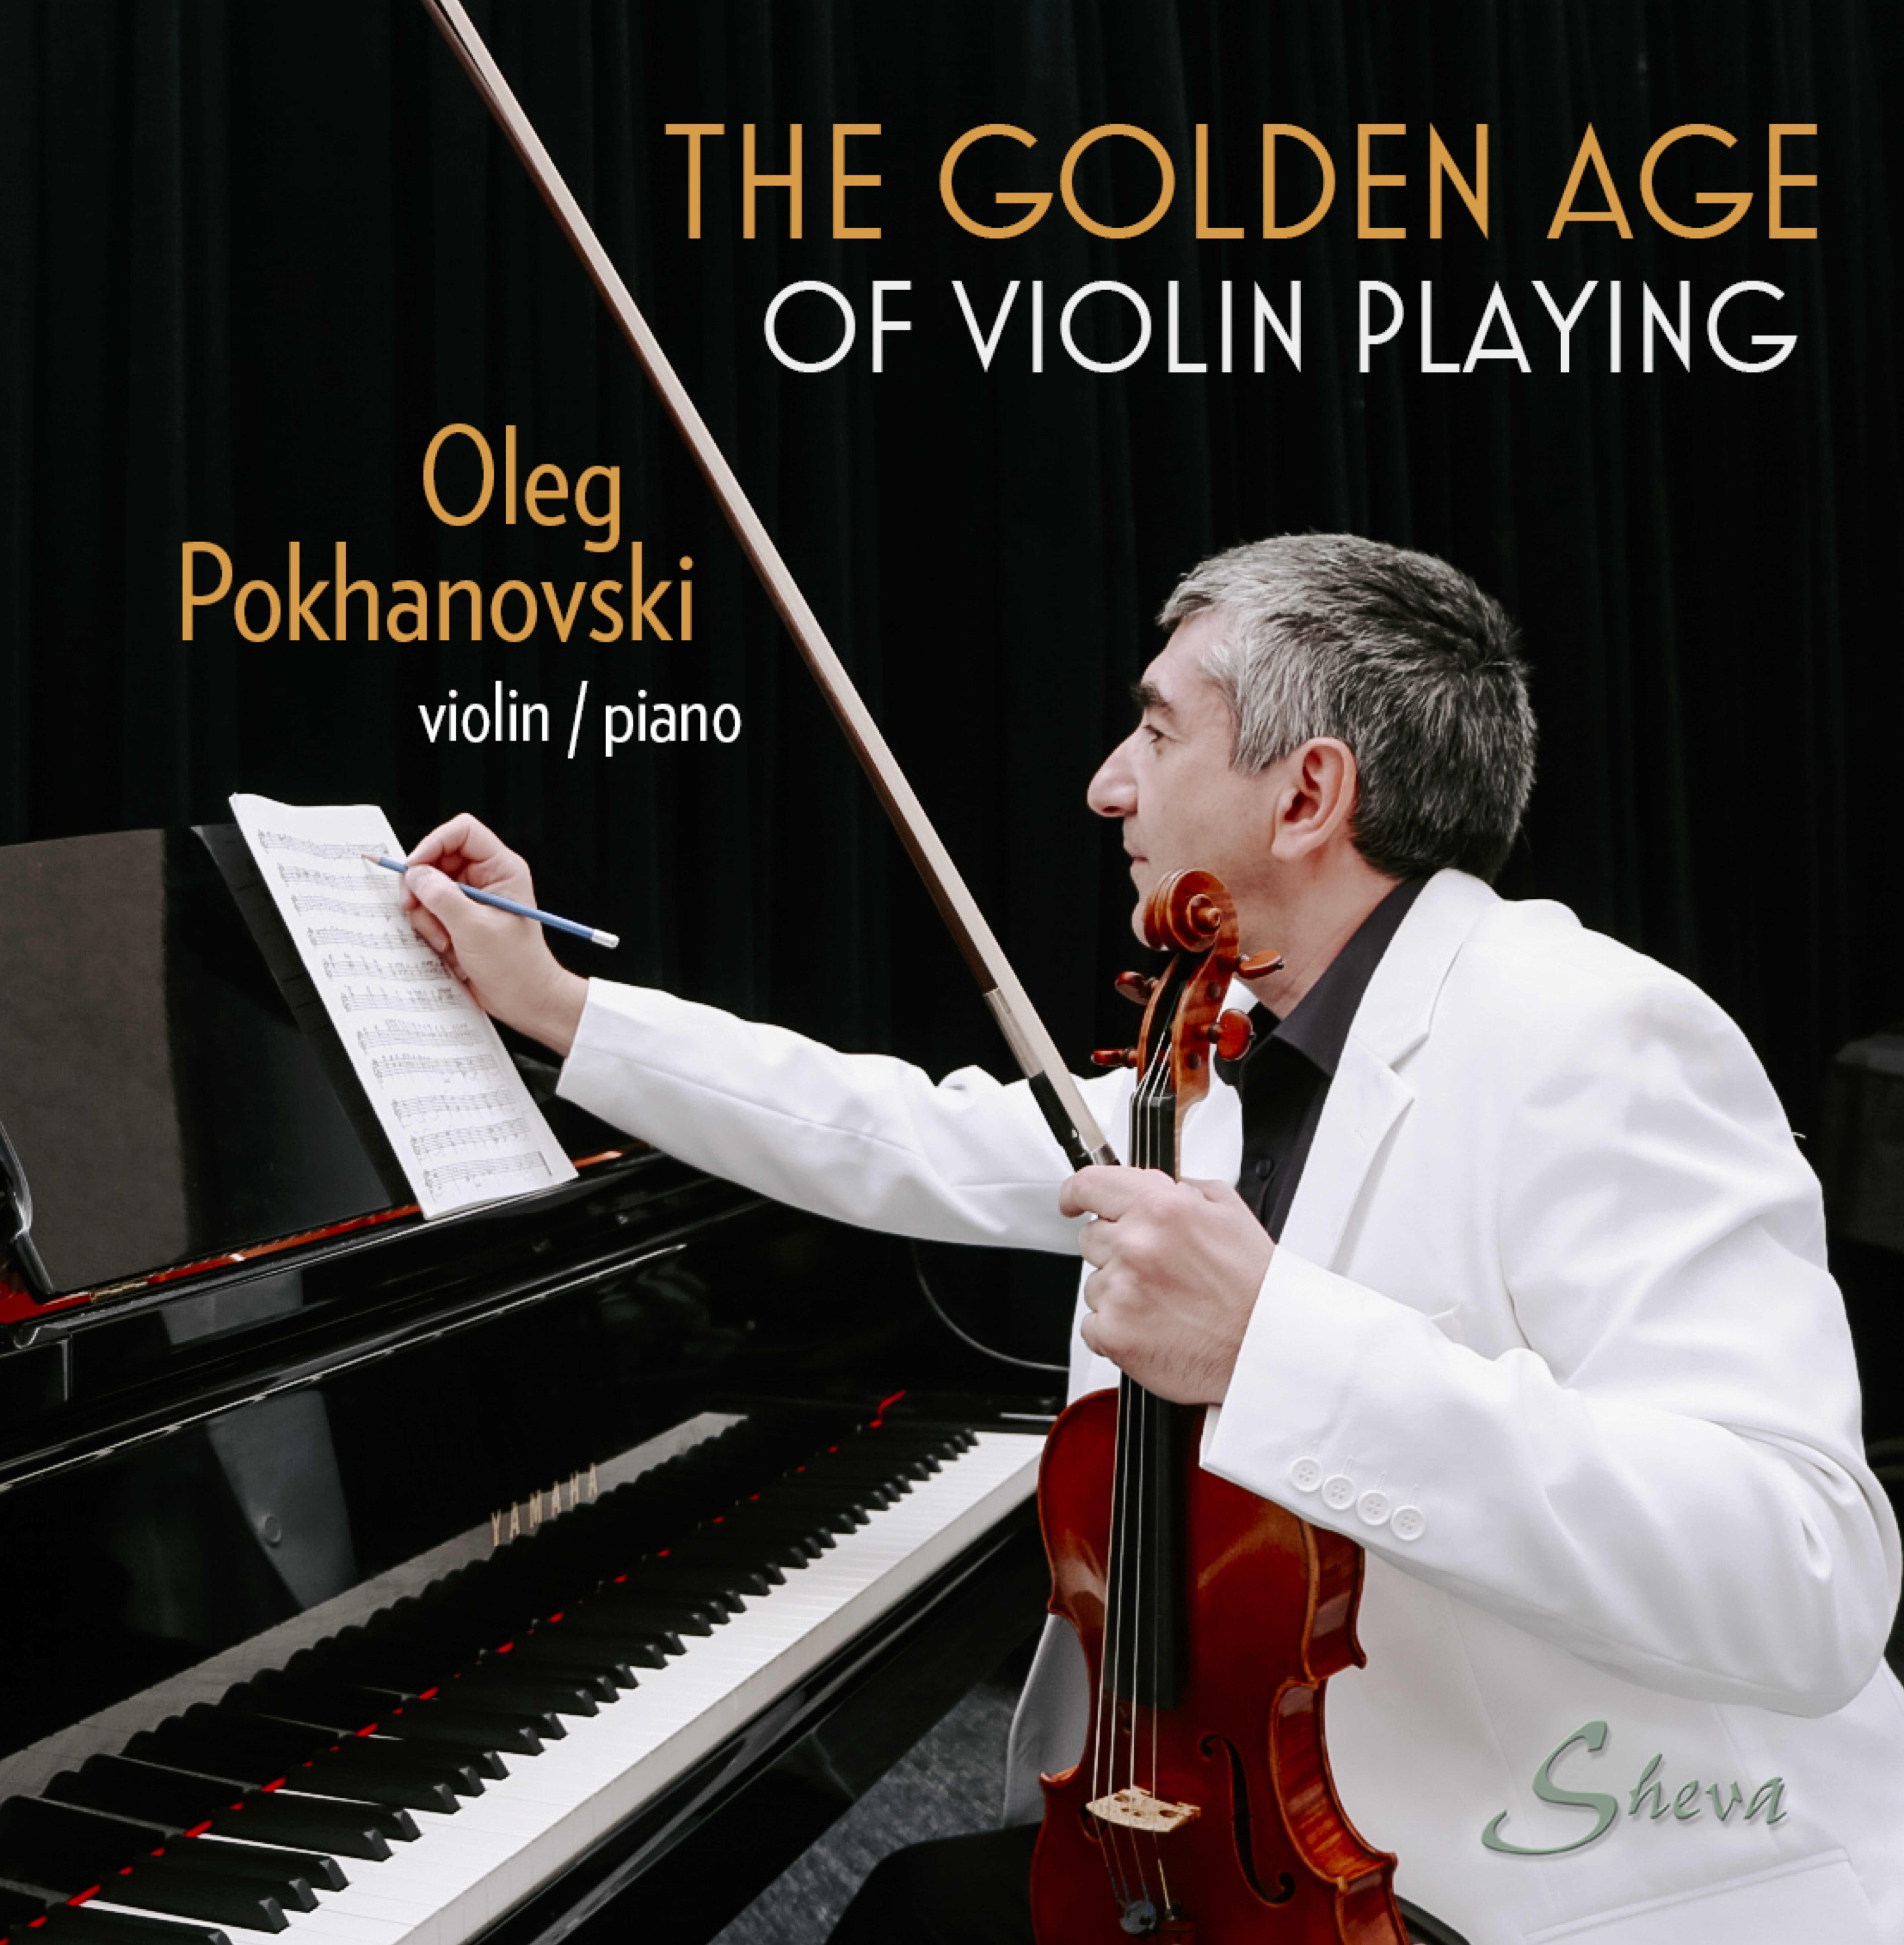 The Golden Age of Violin Playing (Transcriptions for Violin and Piano by Oleg Pokhanovski)